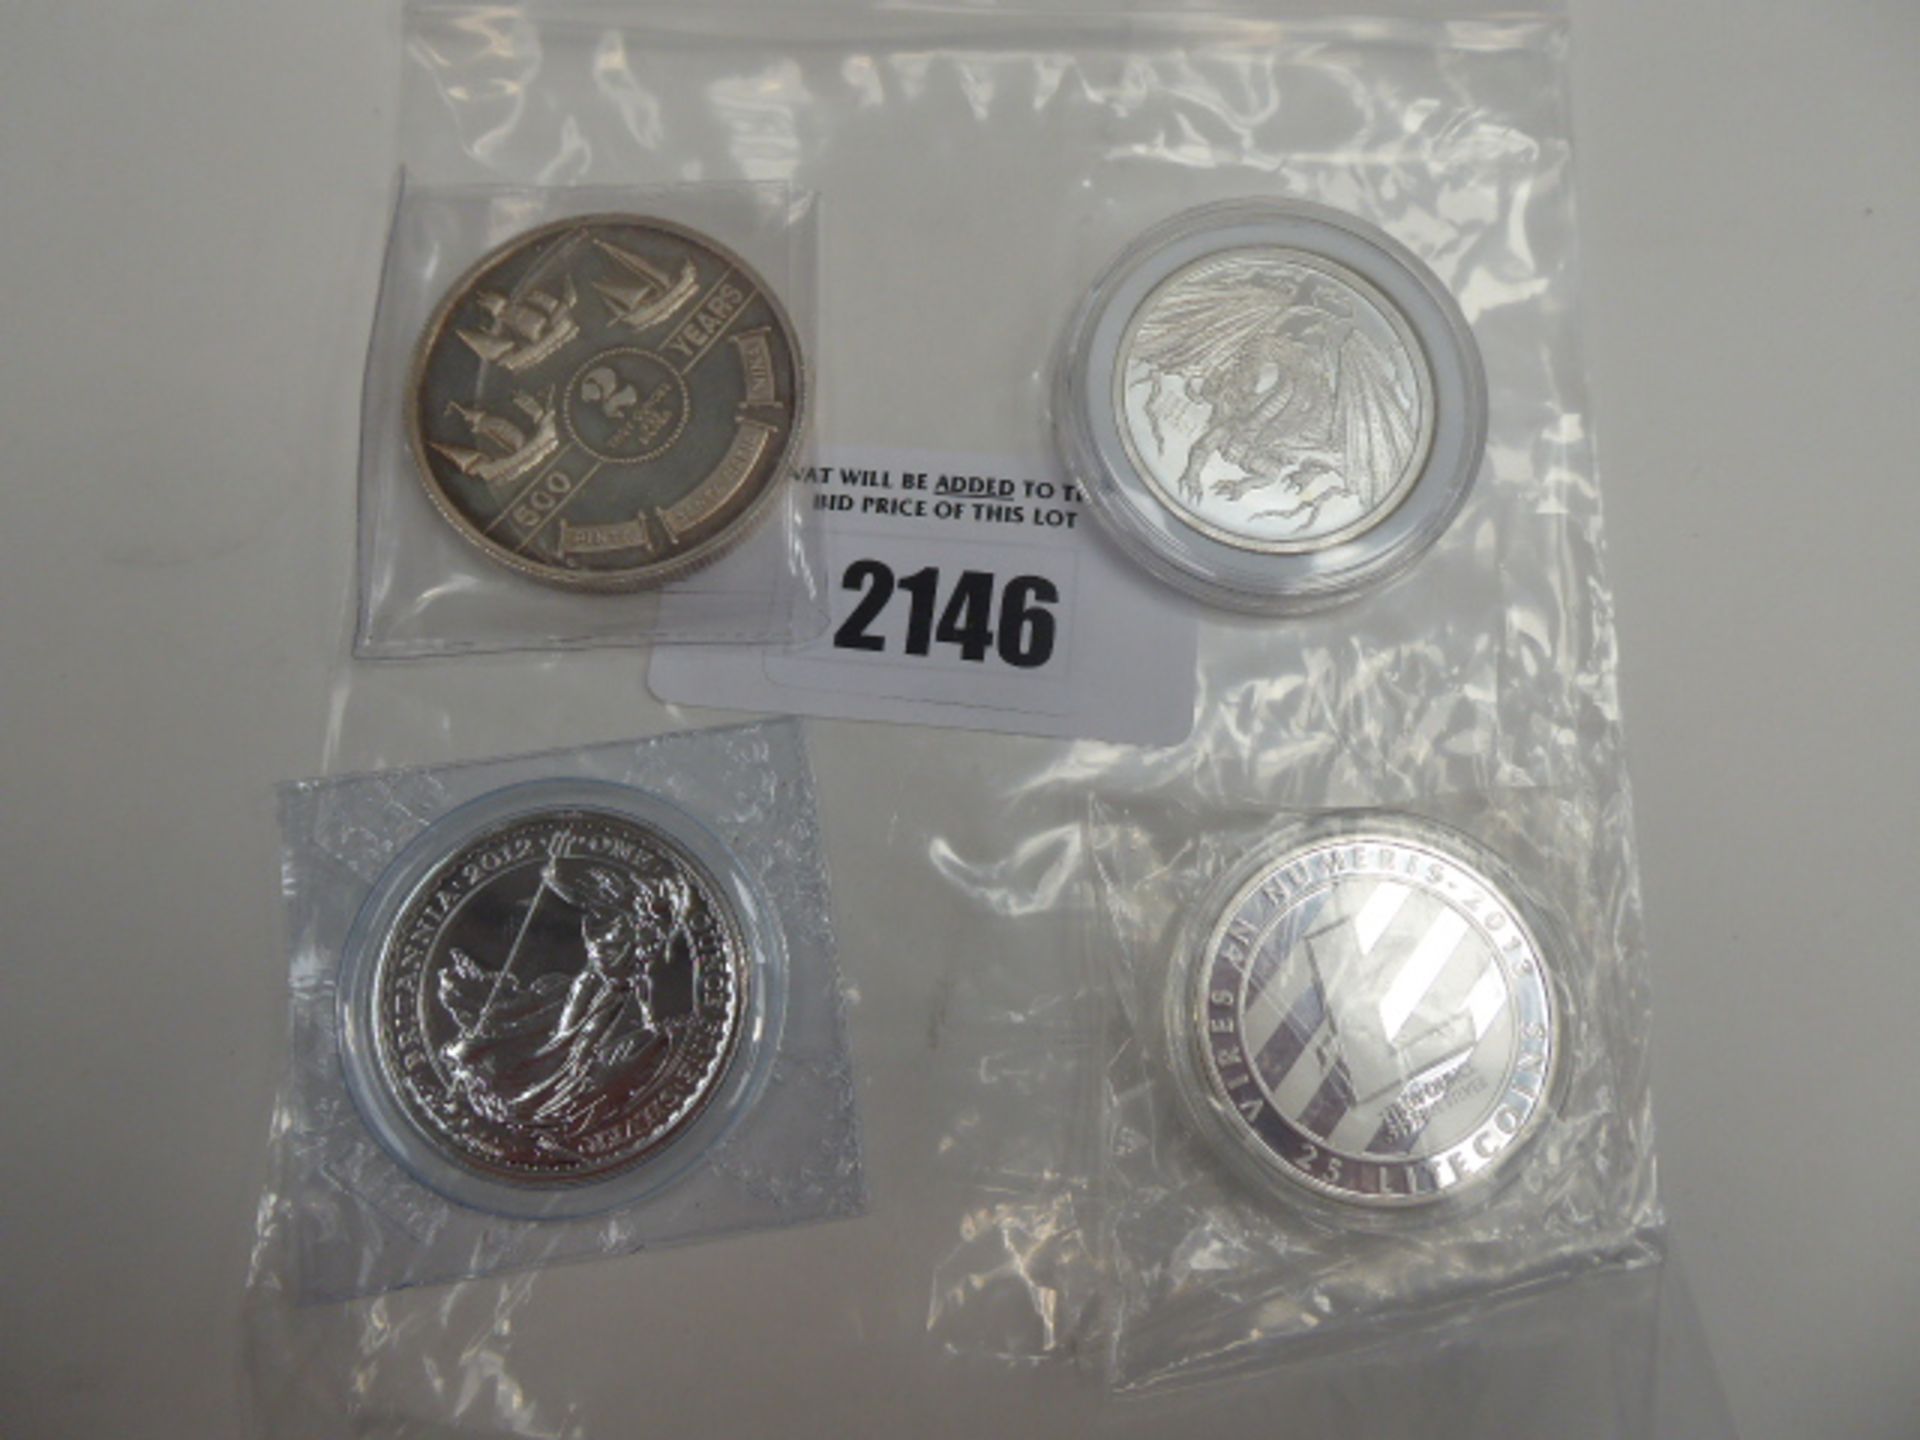 4 silver coins; 2 pound Britannia, World of Dragon, Discovery of Americas and Litecoin